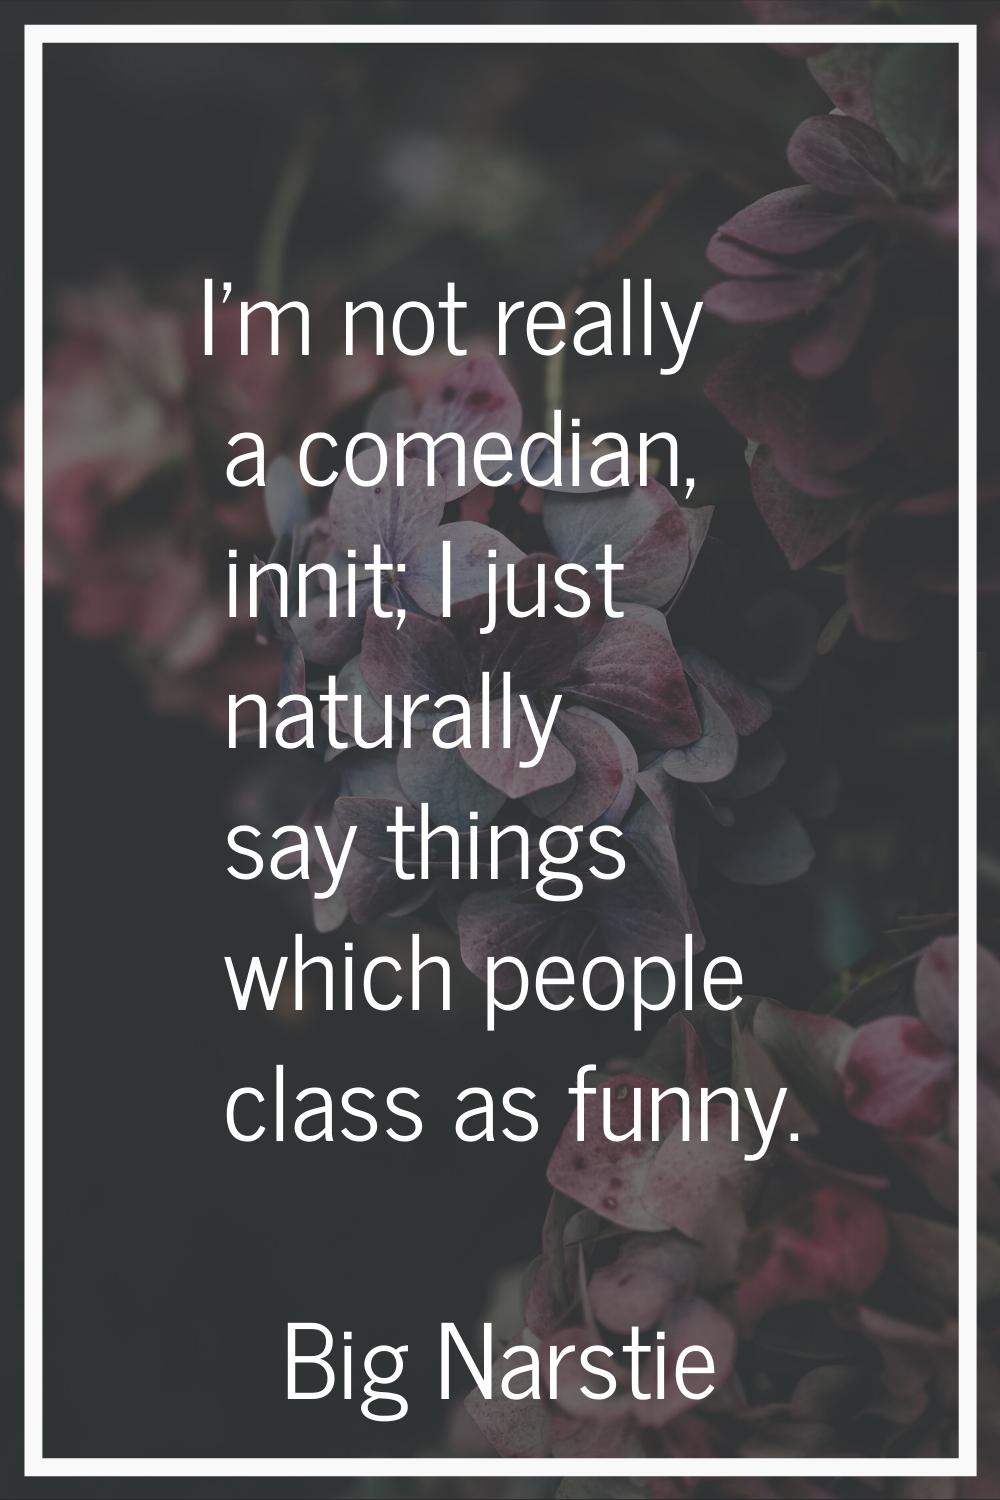 I'm not really a comedian, innit; I just naturally say things which people class as funny.